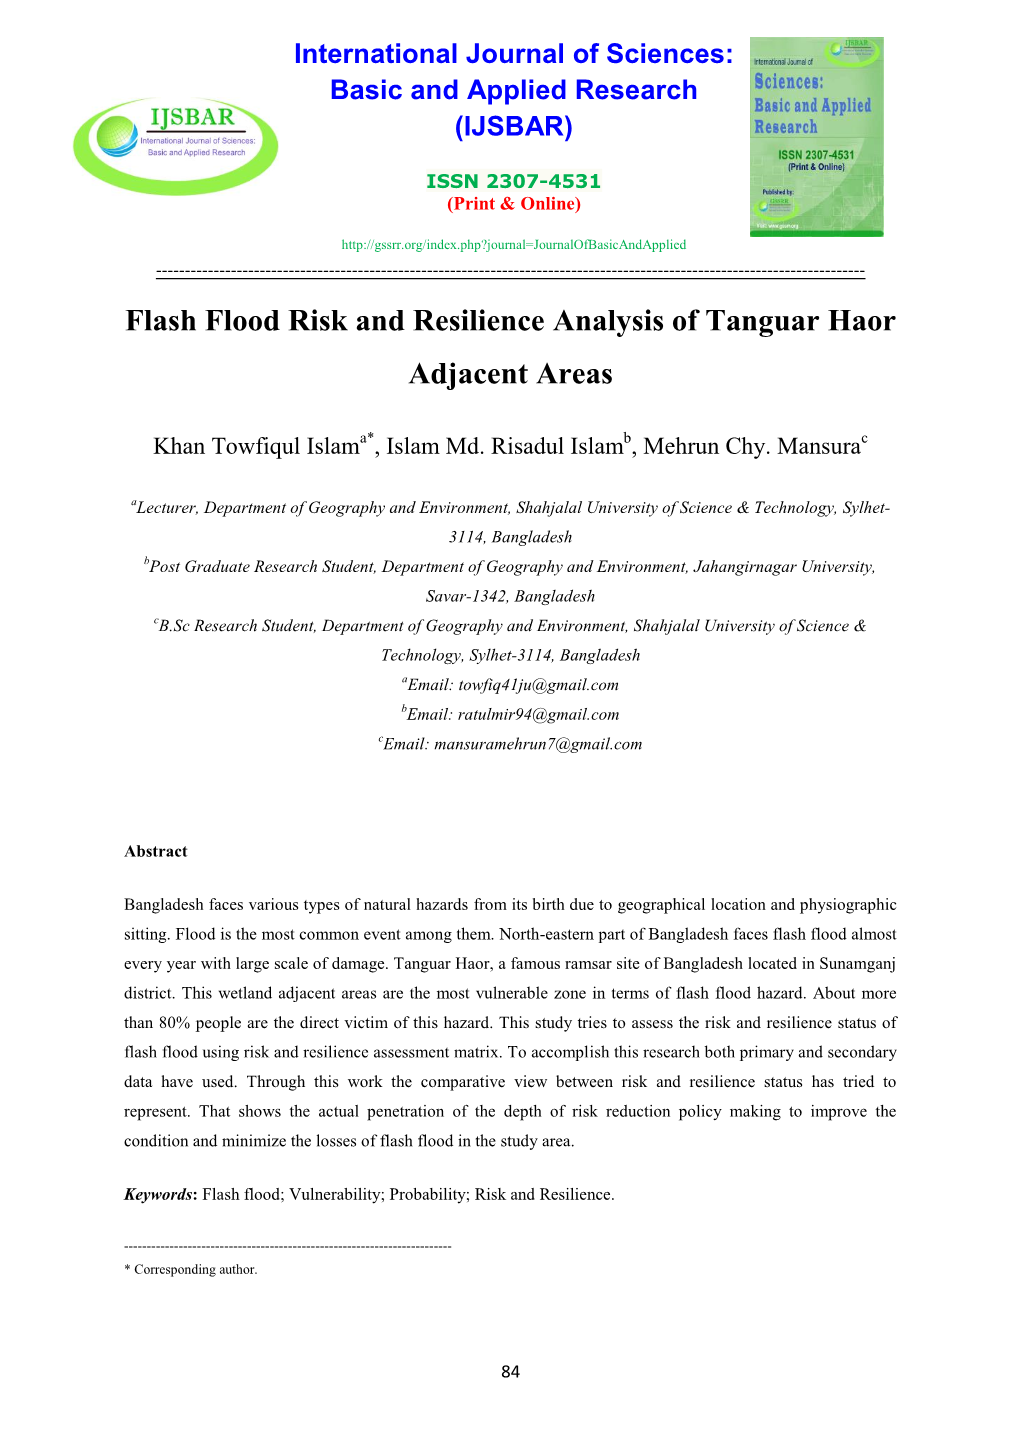 Flash Flood Risk and Resilience Analysis of Tanguar Haor Adjacent Areas